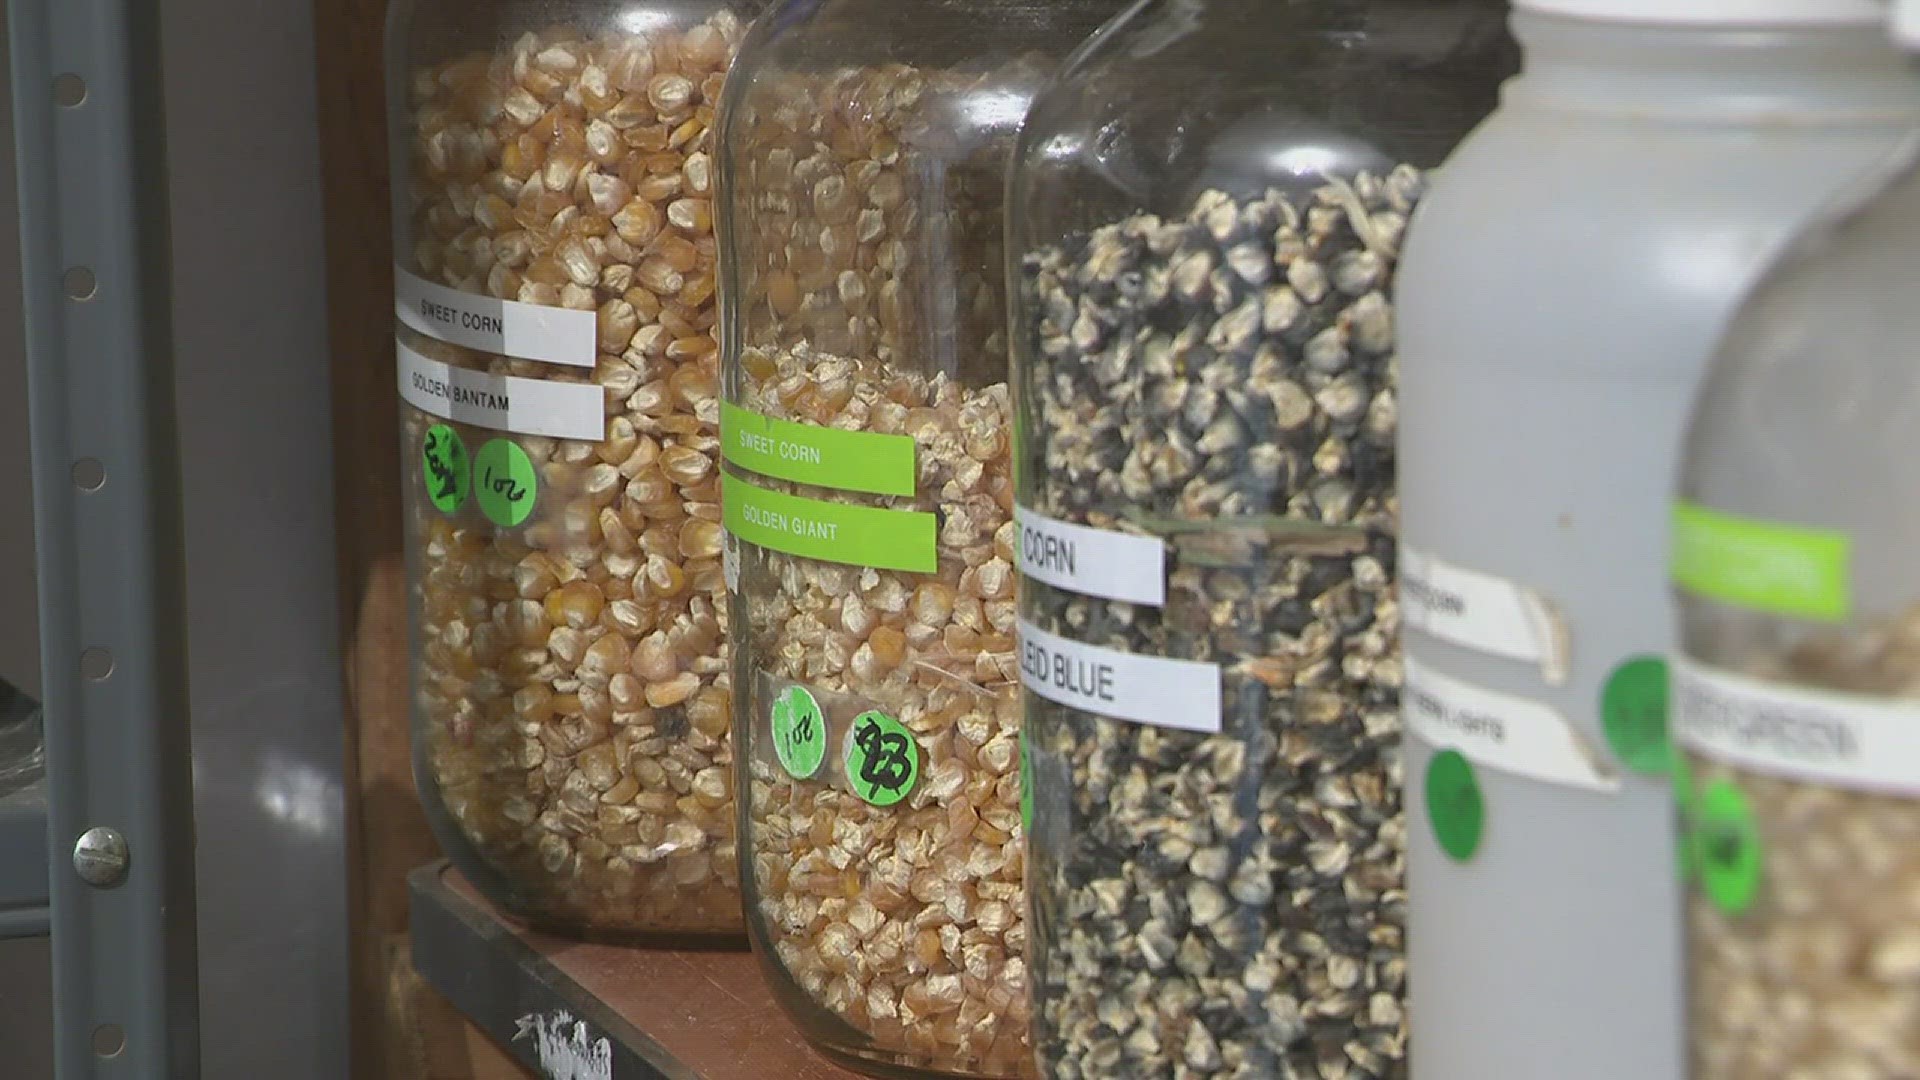 Glenn Drowns has filled nearly 3,000 jars with all sorts of seeds from around the country.